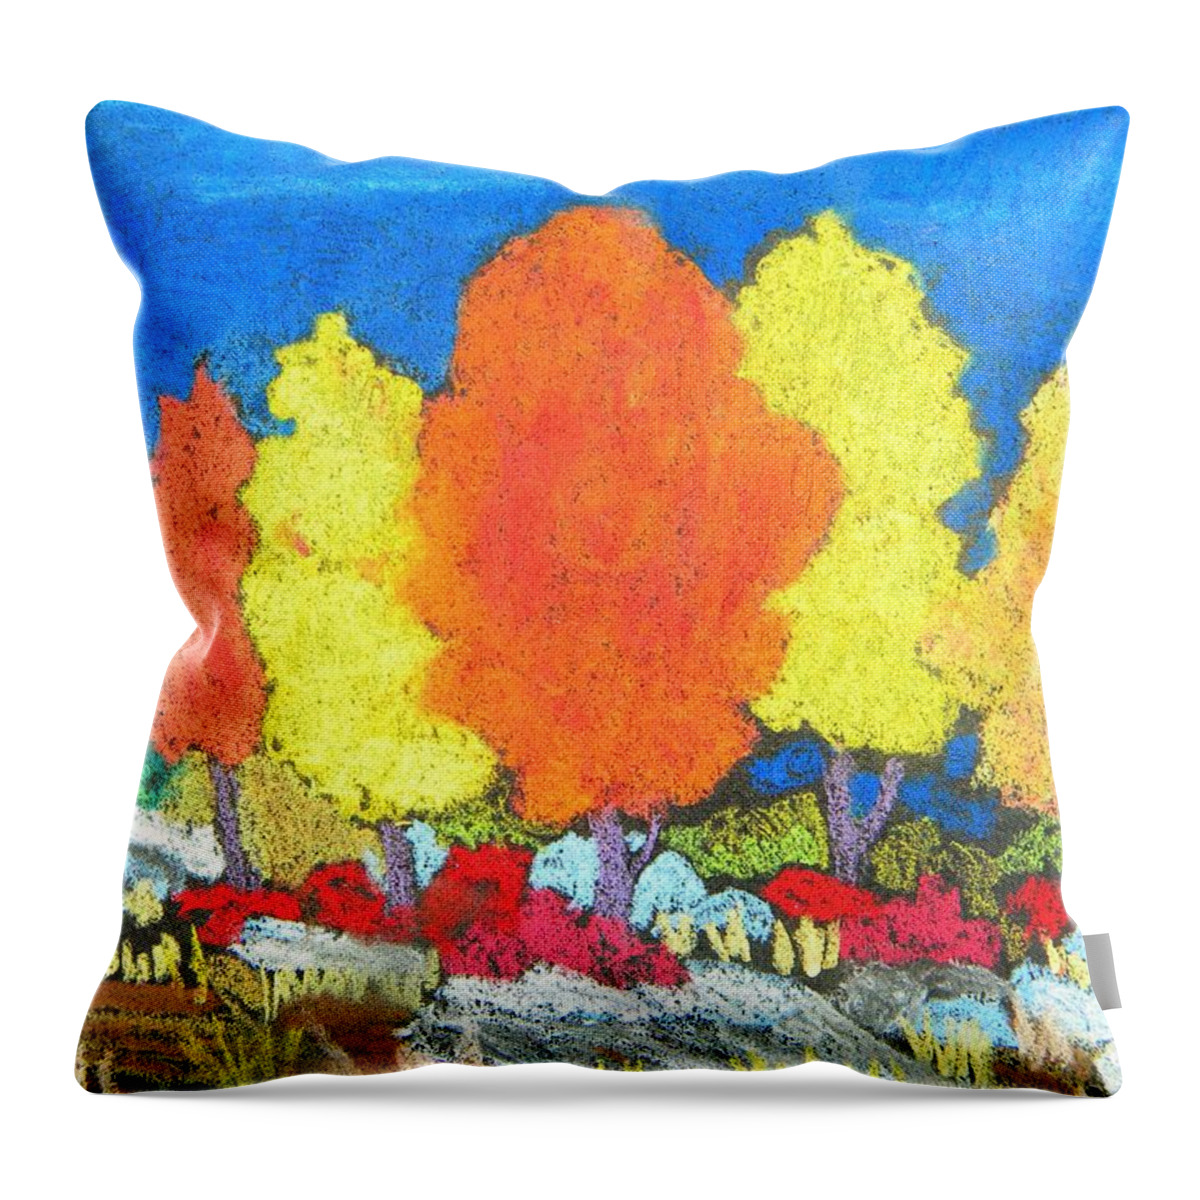 Fall Color Throw Pillow featuring the painting Crisp Autumn Day by Caroline Henry